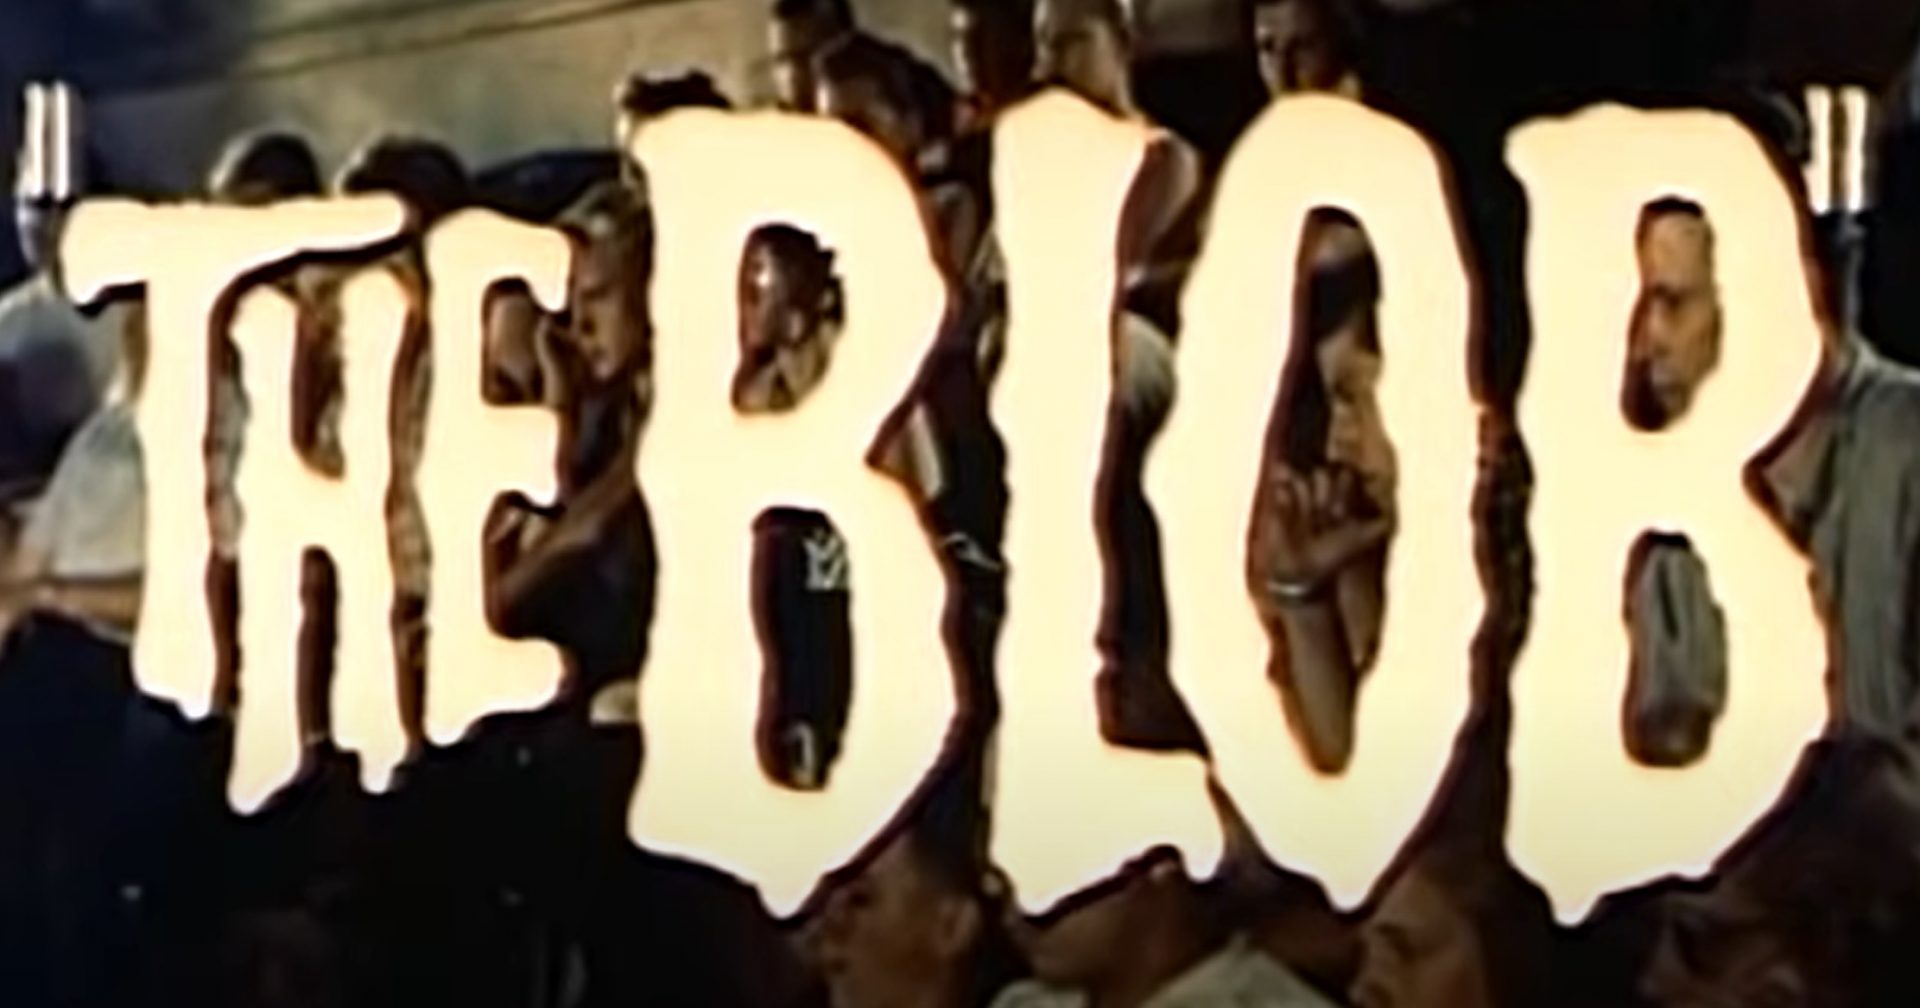 The Blob. Pic: YouTube